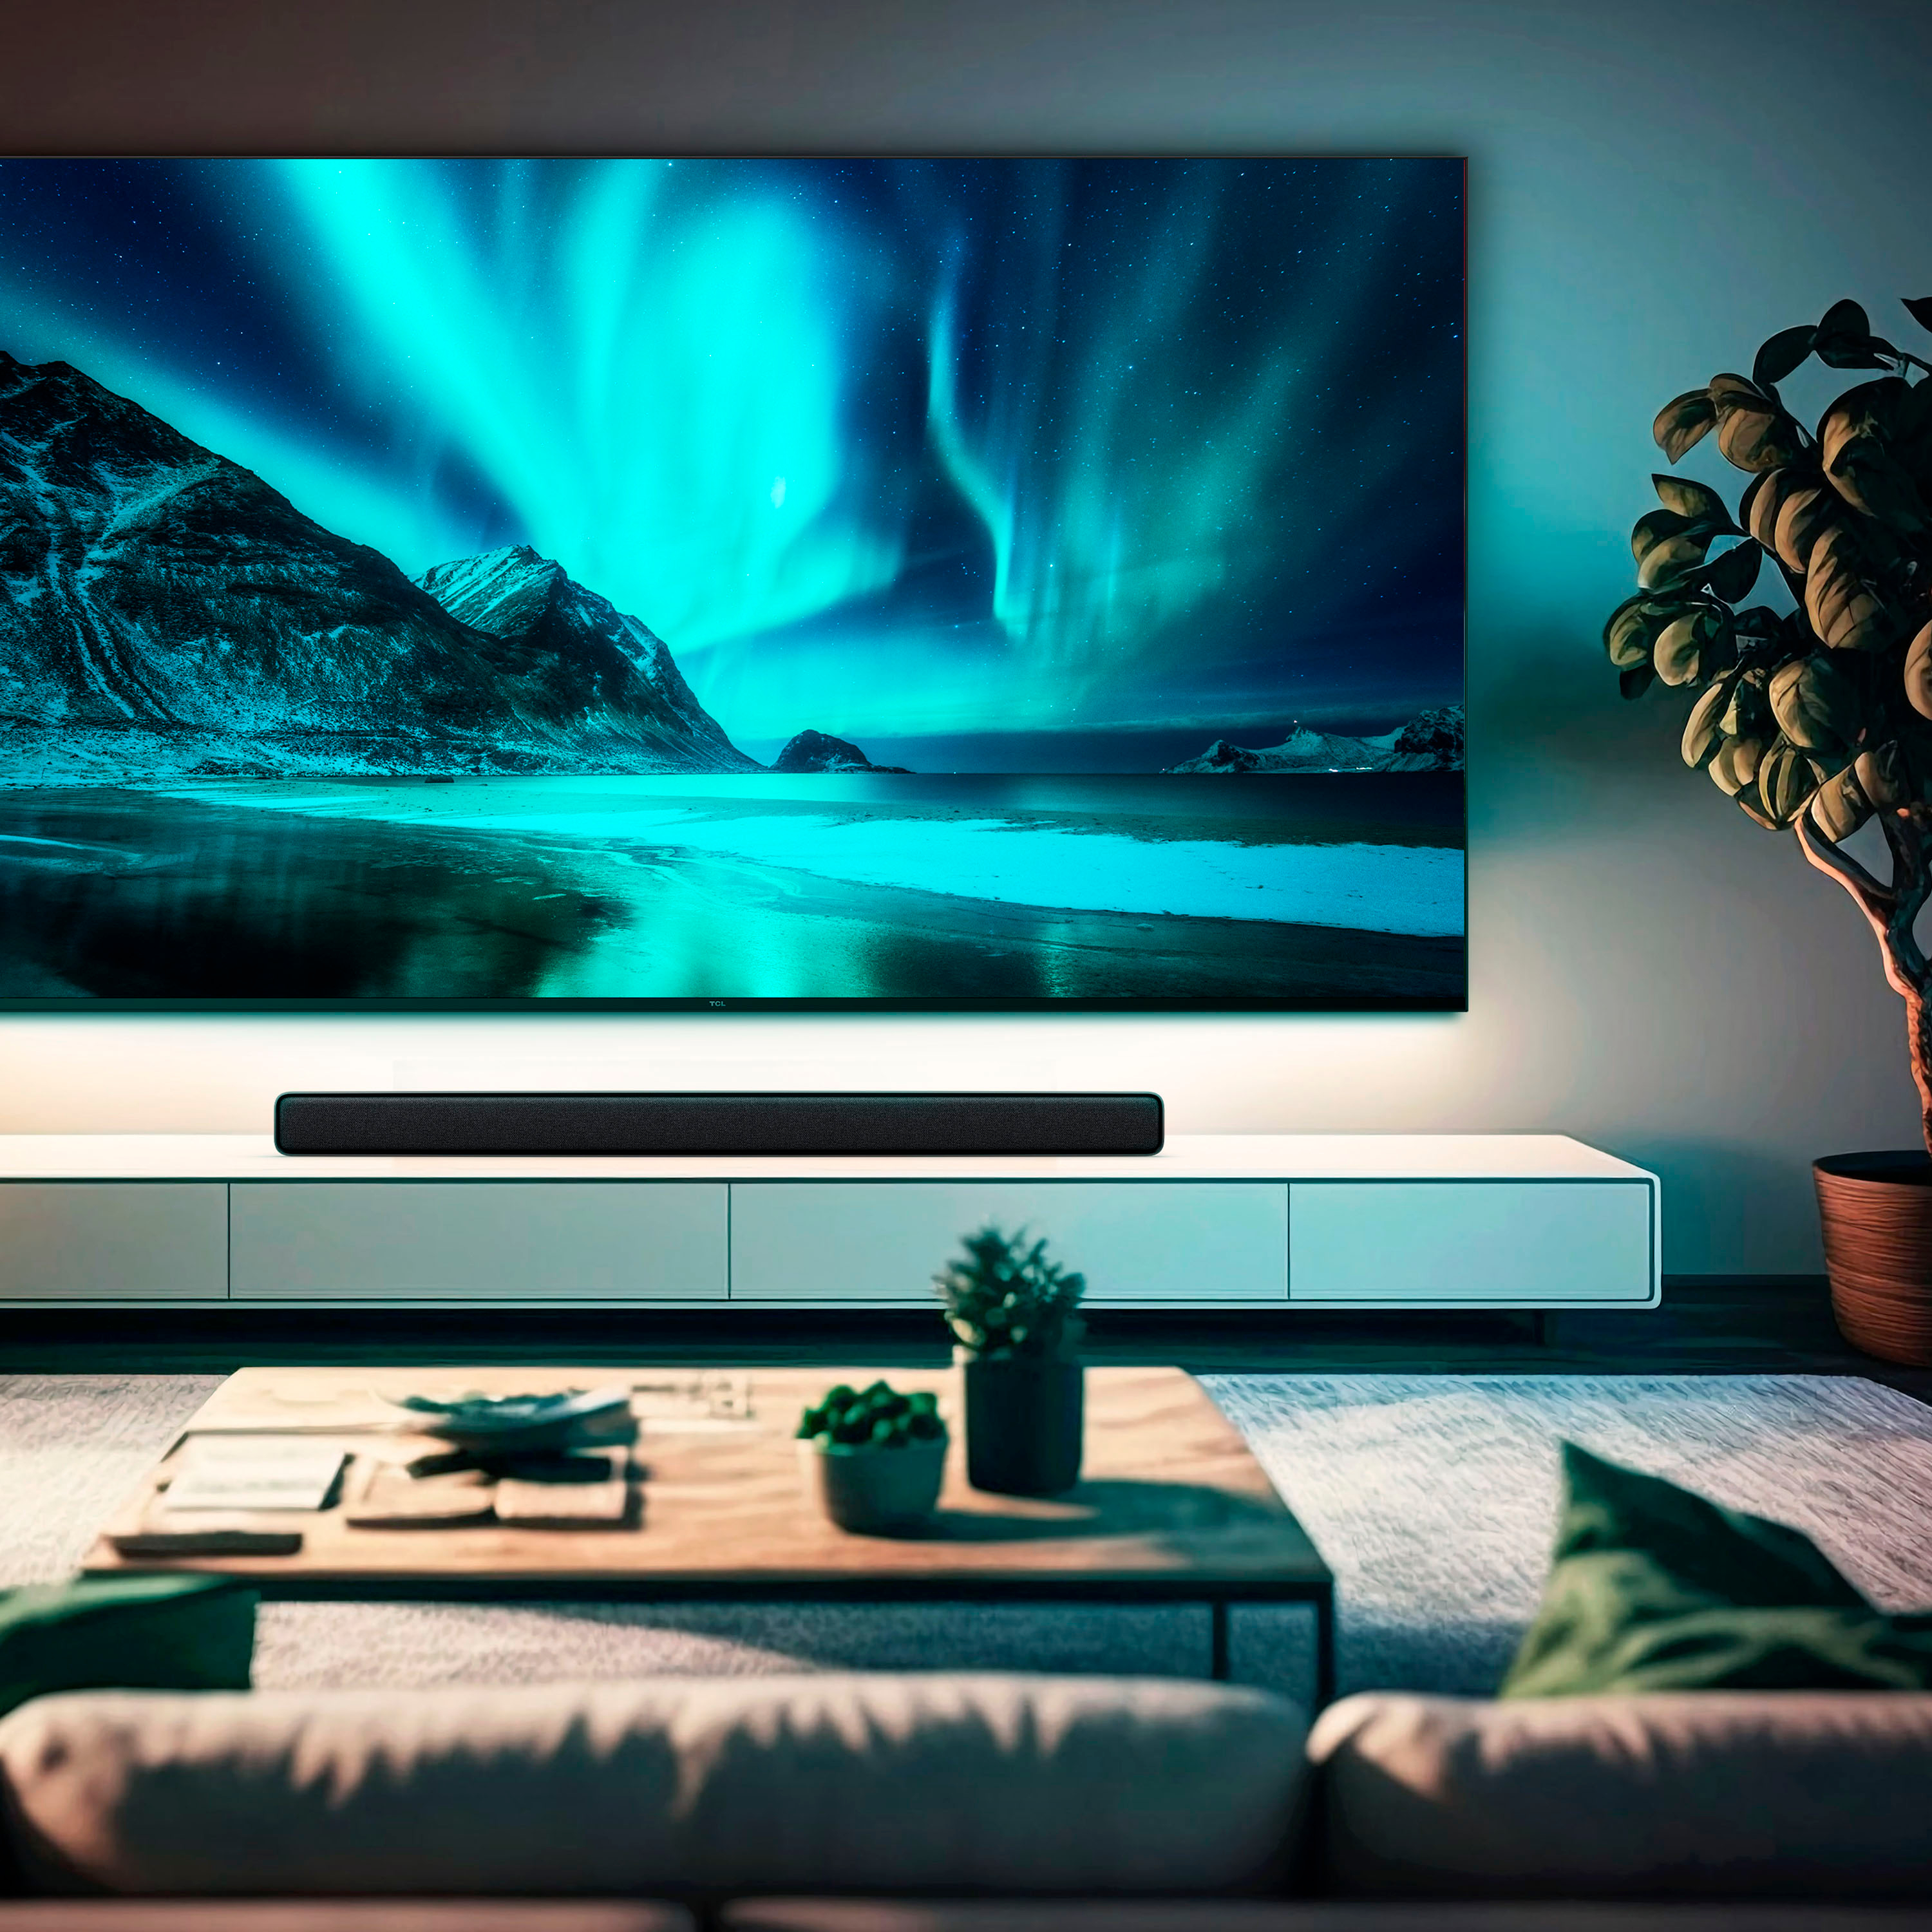 TCL QM8 Mini LED Ultra 4K TVs - specifications for the USA market